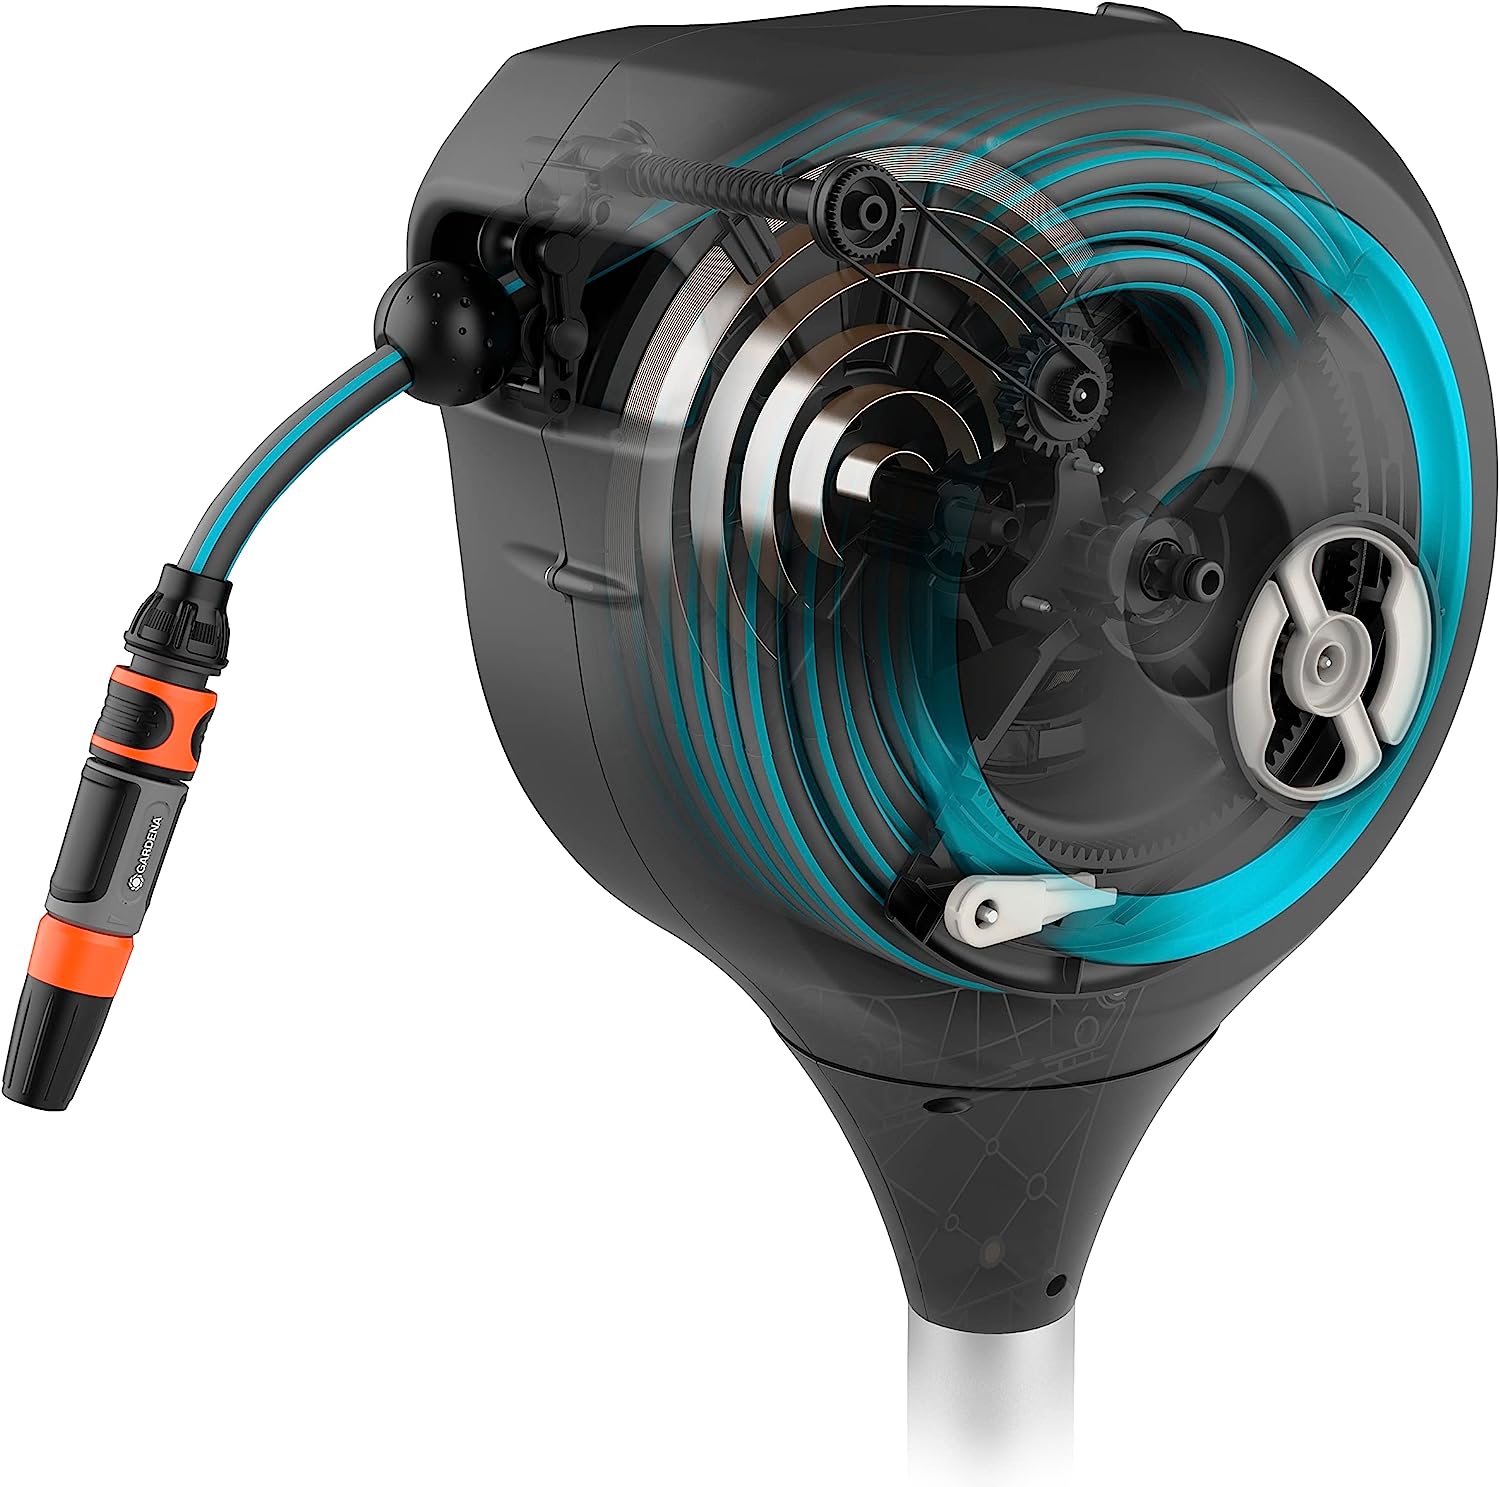 GARDENA 115' ft. Wall Mounted Retractable Hose Reel, Black and Turquoise